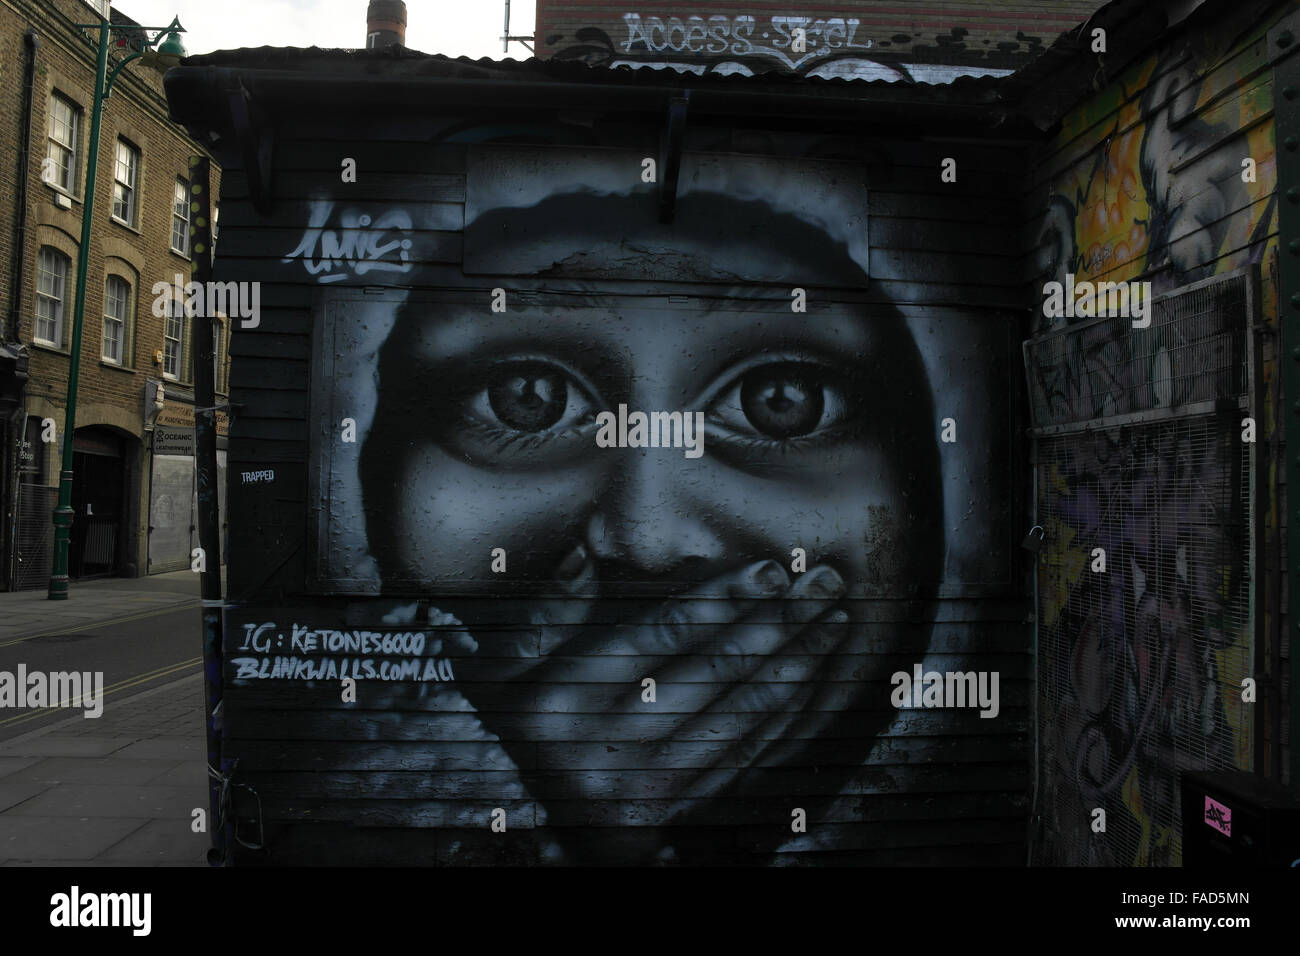 Grey sky view Ketones 6000 monochrome face with hand over mouth, shop wall, Brick Lane at Pedley Street, London, E1, UK Stock Photo